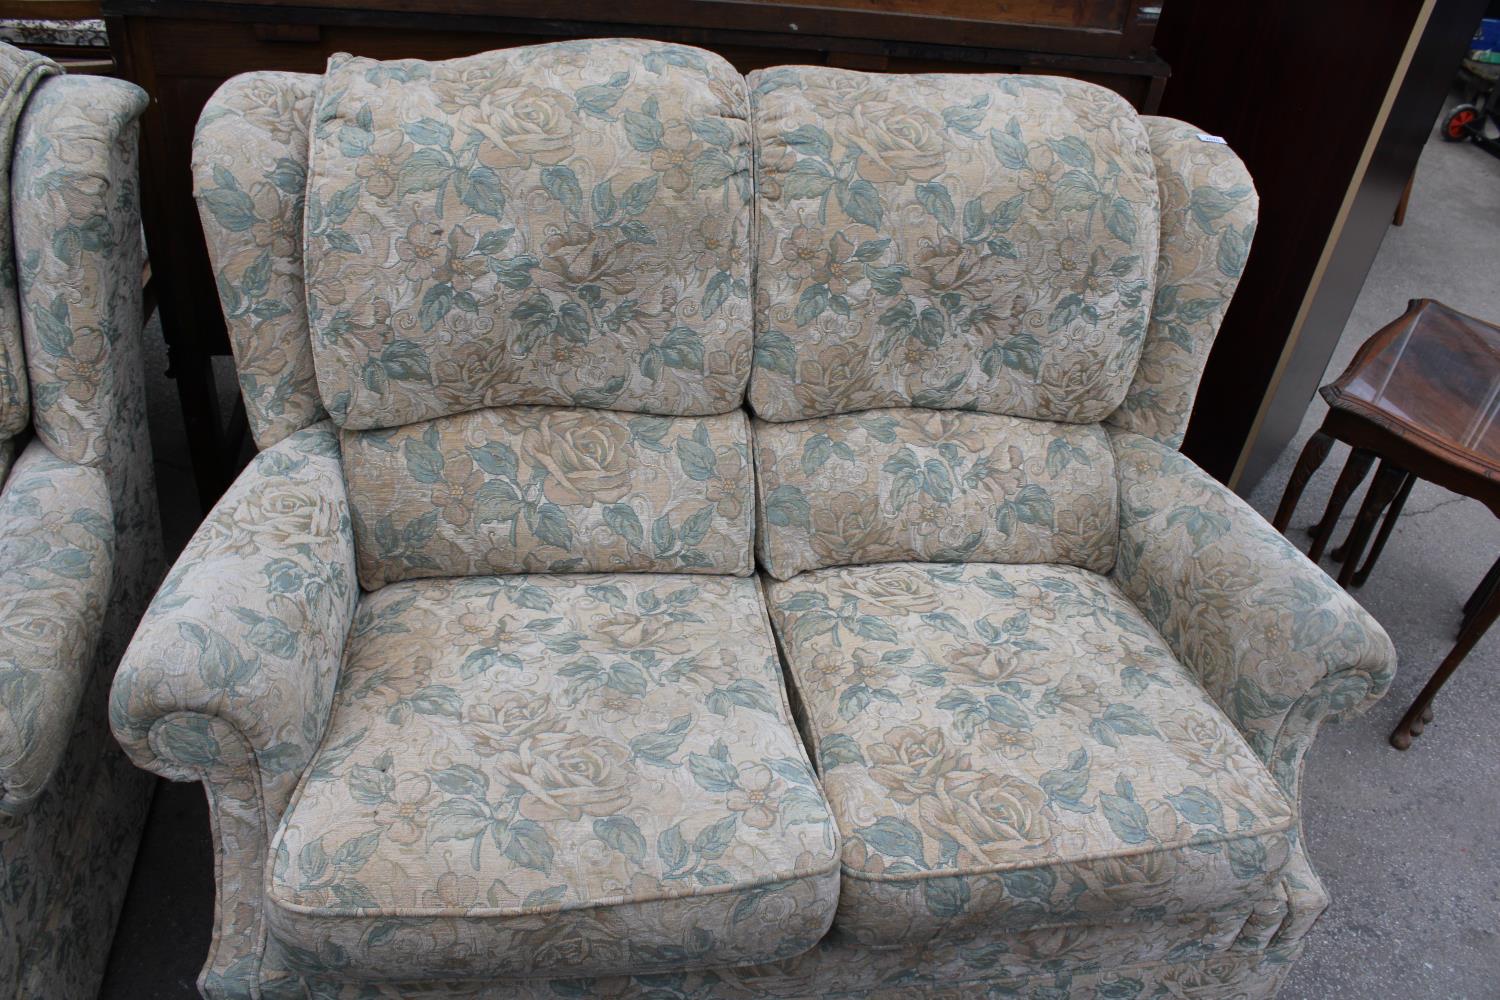 A MODERN G.PLAN TWO SEATER SETTEE AND A MATCHING RECLINER - Image 5 of 6